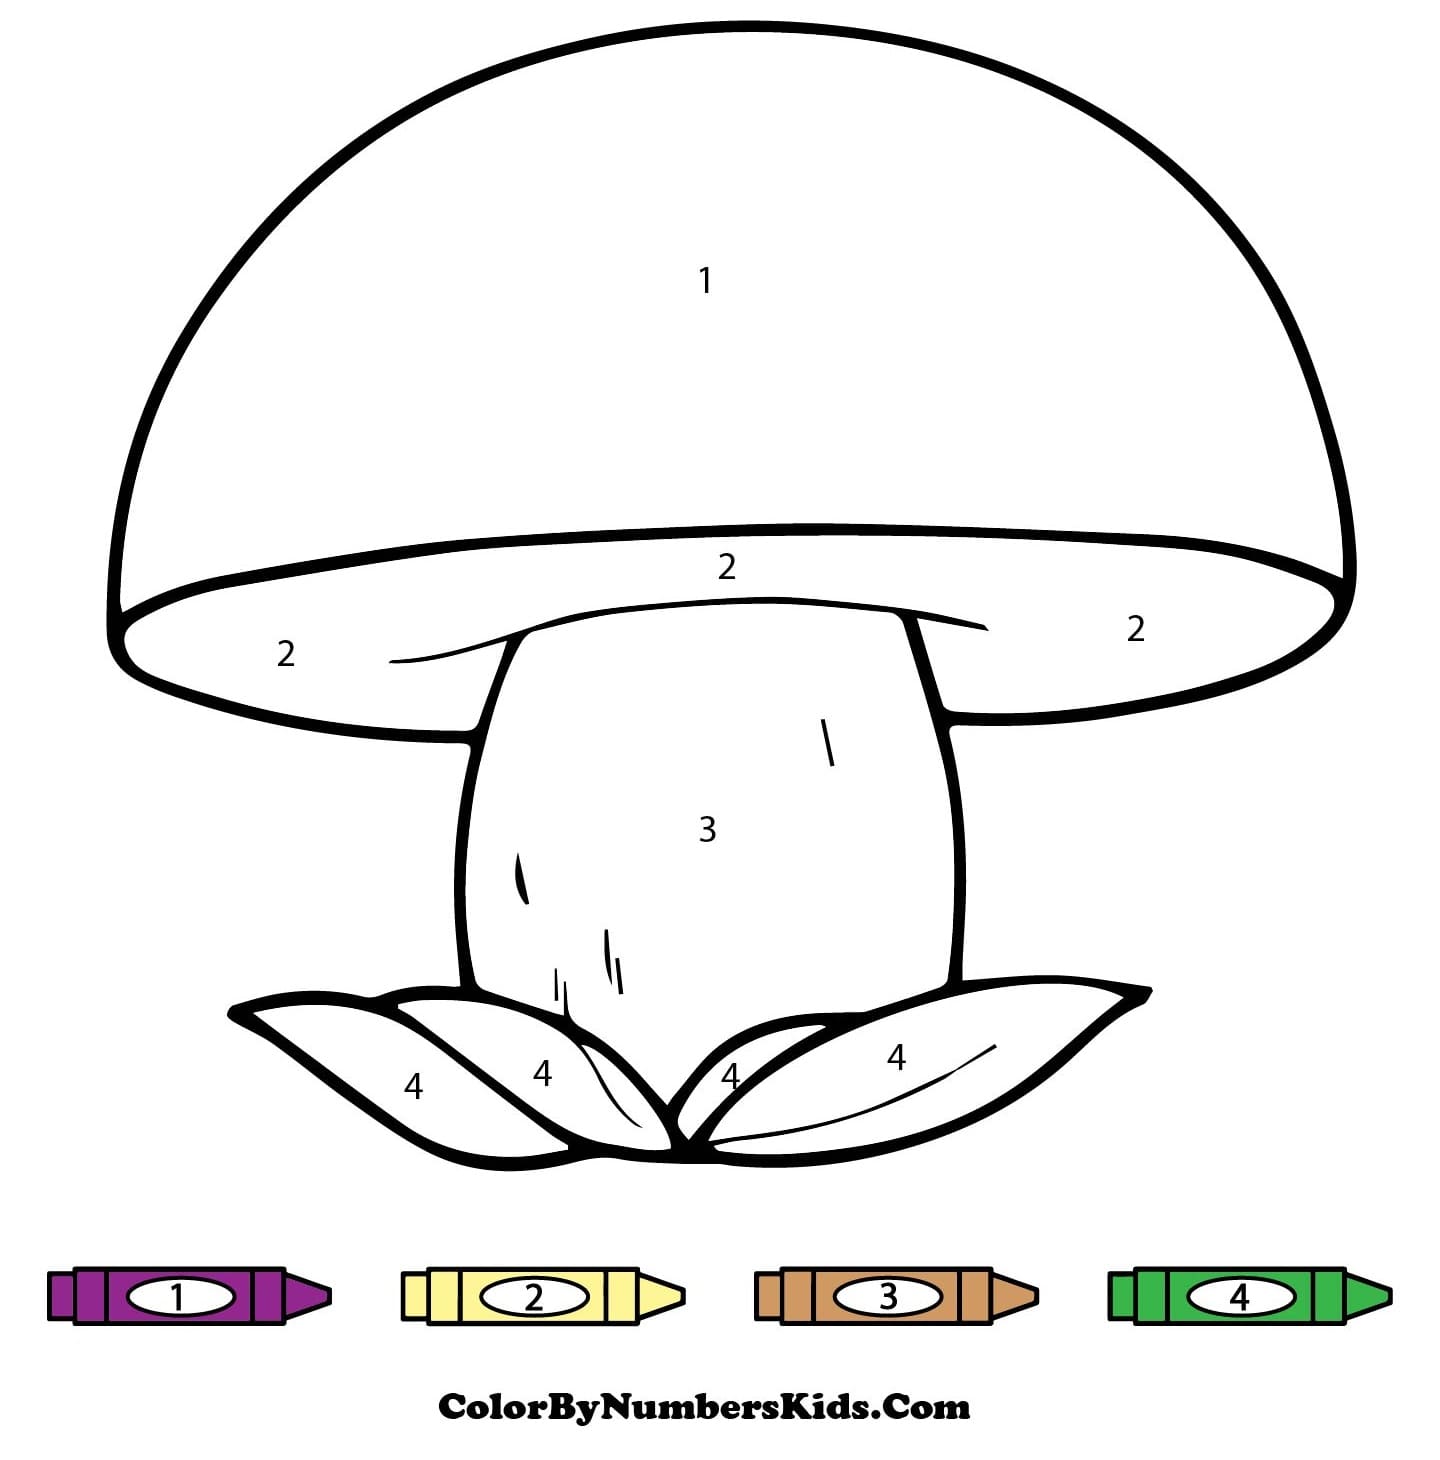 A Mushroom Color By Number